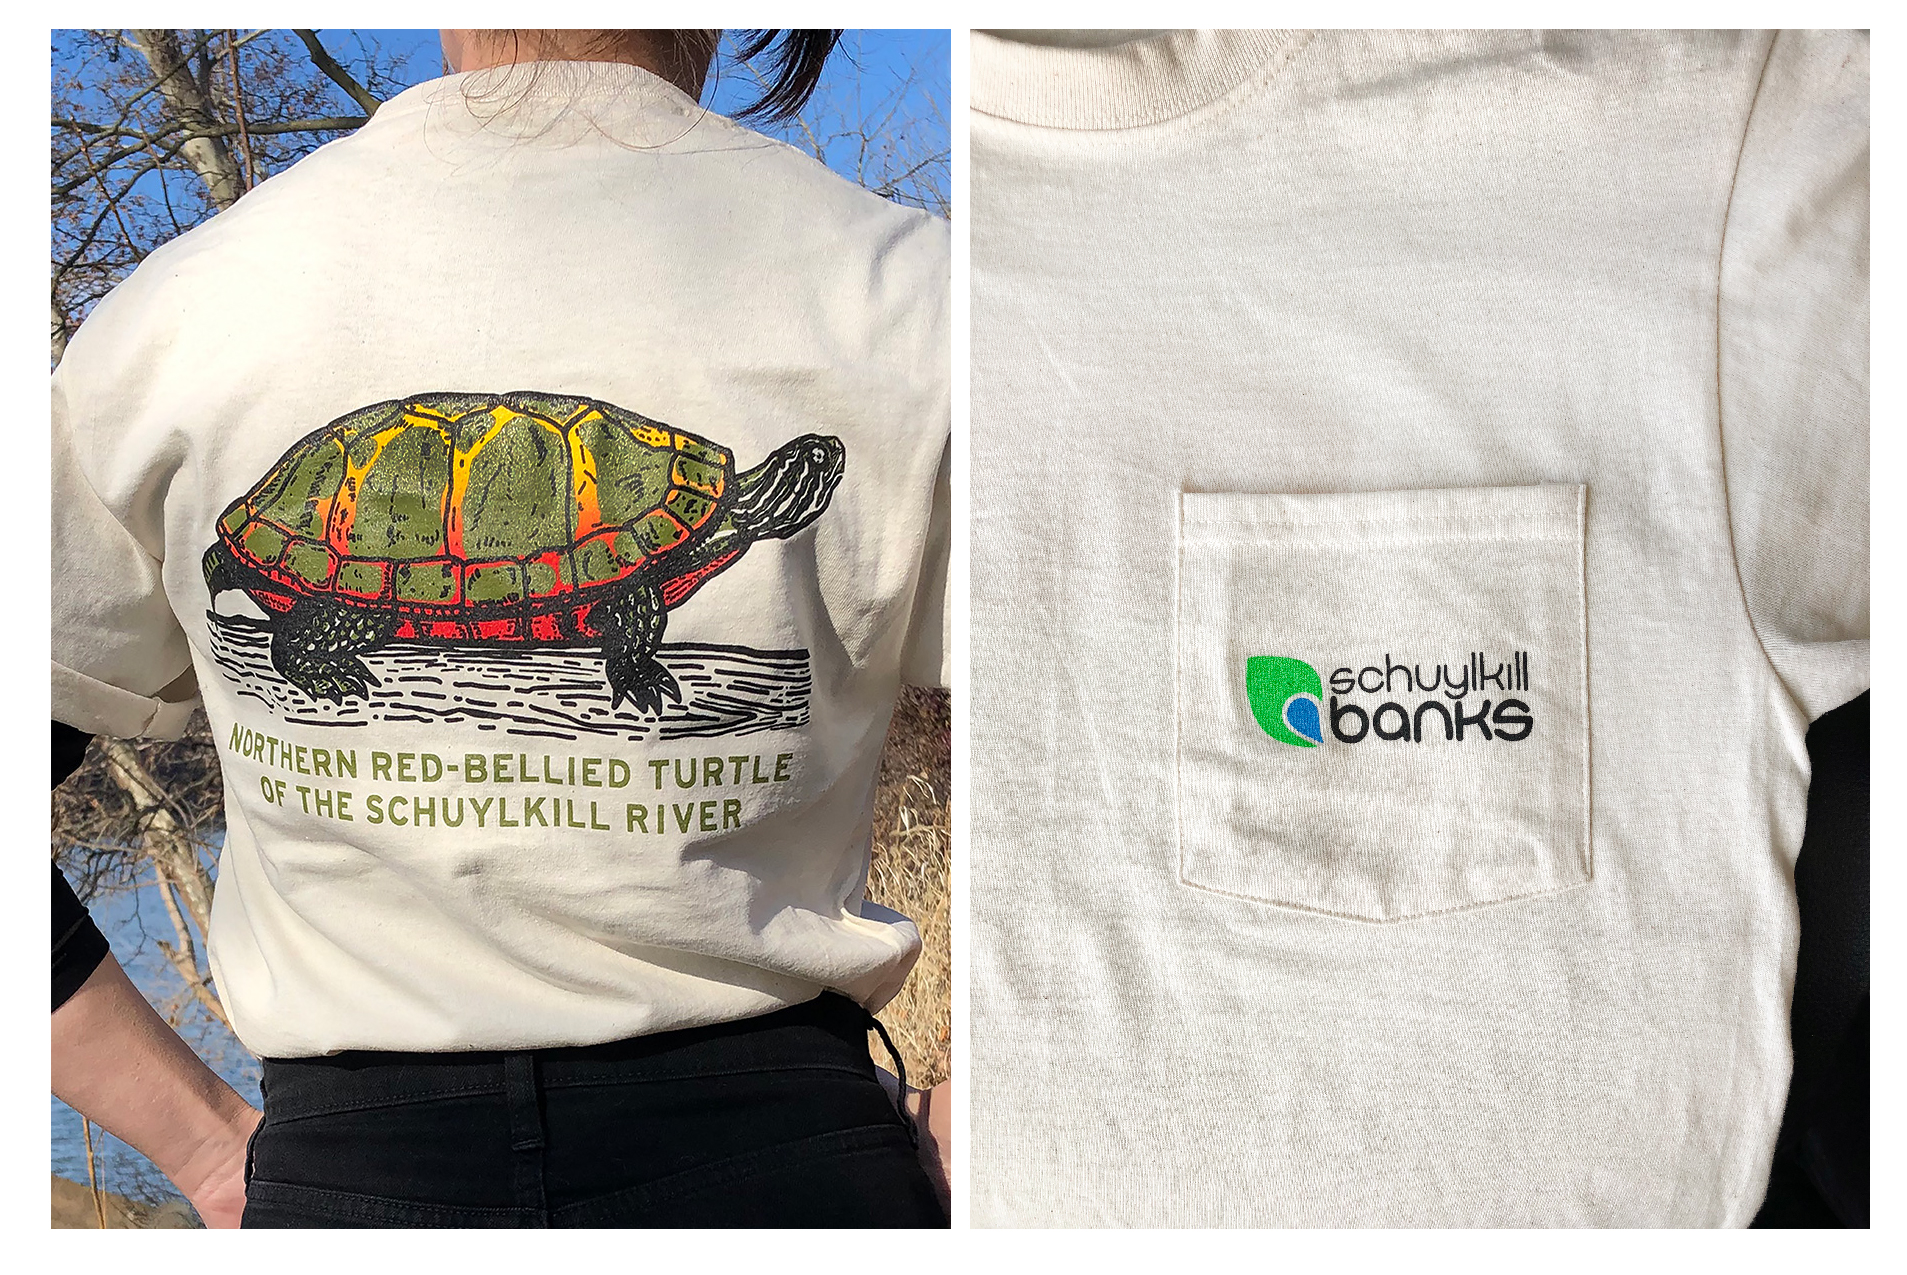 Northern Red-Bellied Turtle T-shirt